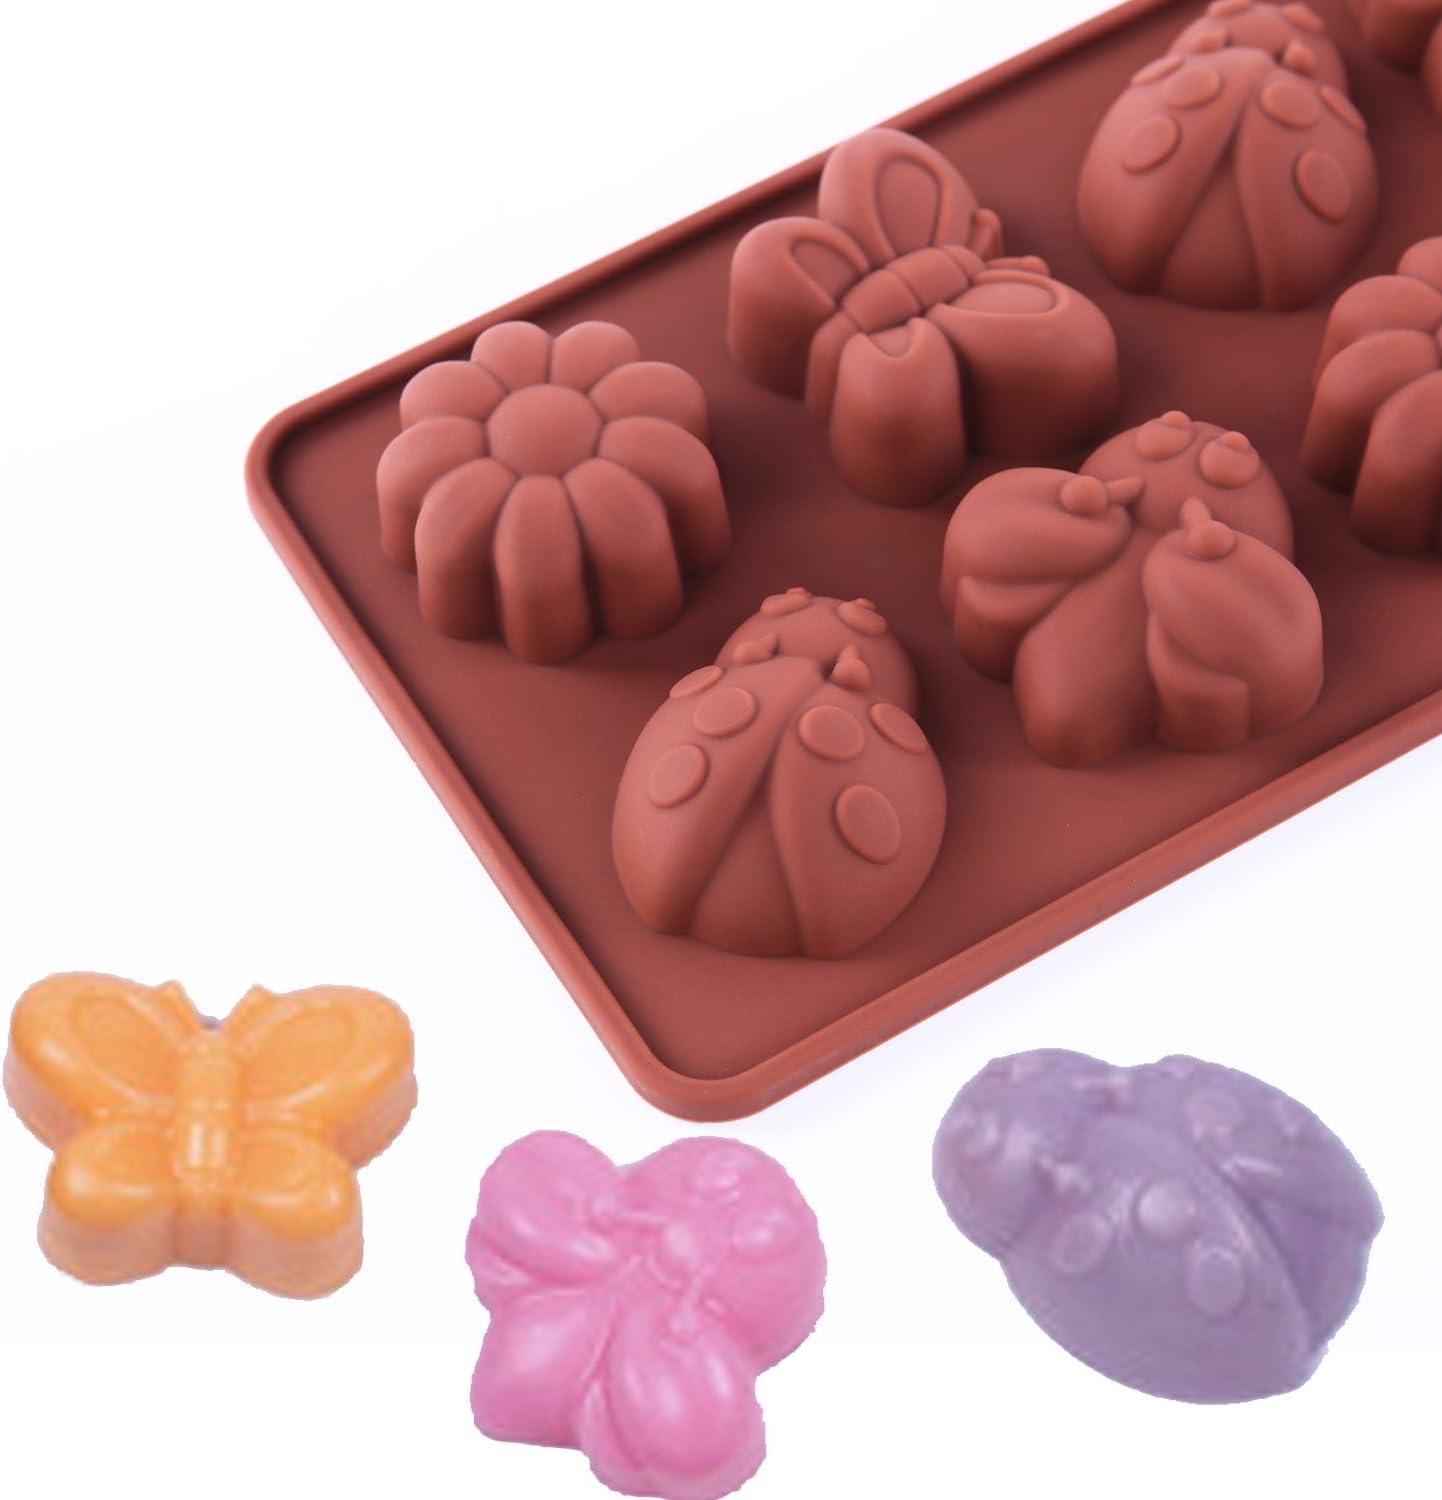 3 Pack Star Shapes Silicone Candy Mold Non-stick Fondant Baking